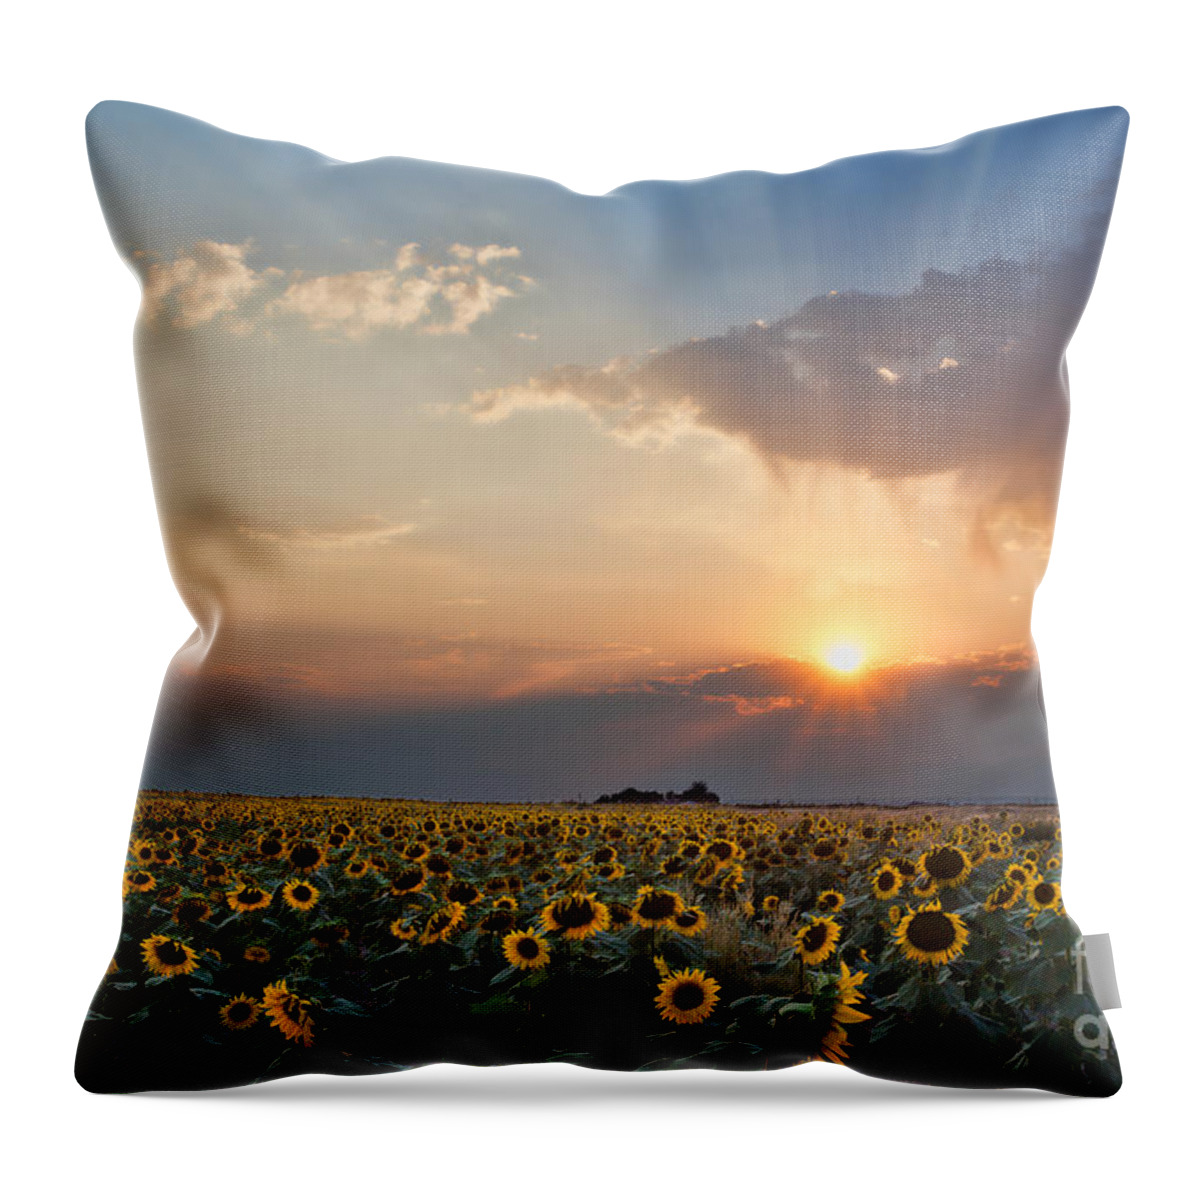 Flowers Throw Pillow featuring the photograph August Dreams by Jim Garrison